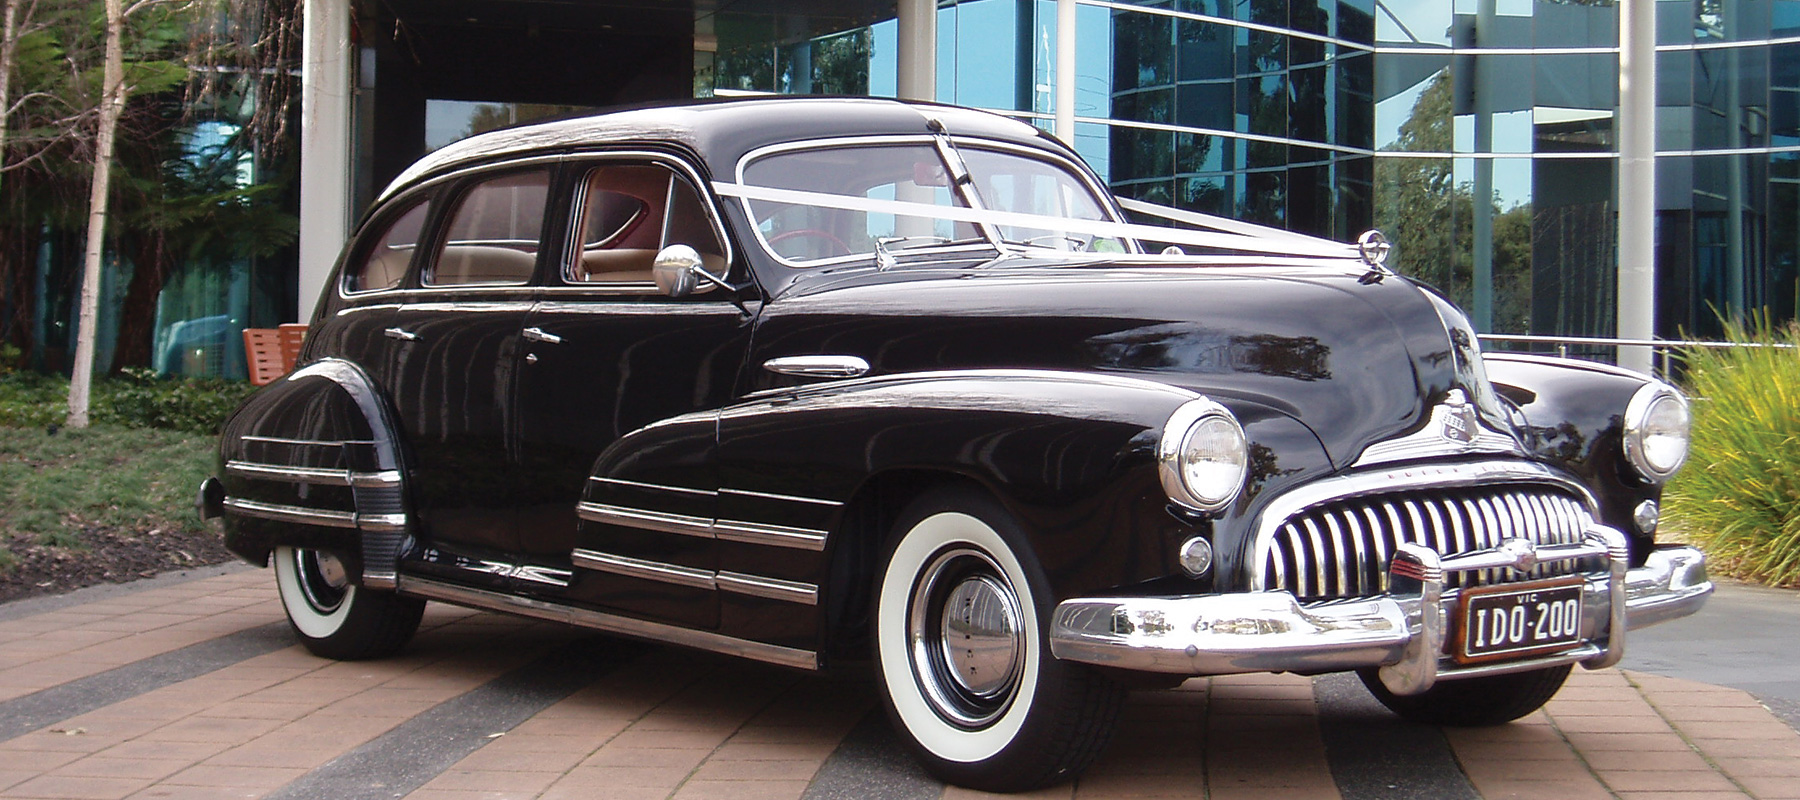 About Black Buick Wedding Cars Melbourne